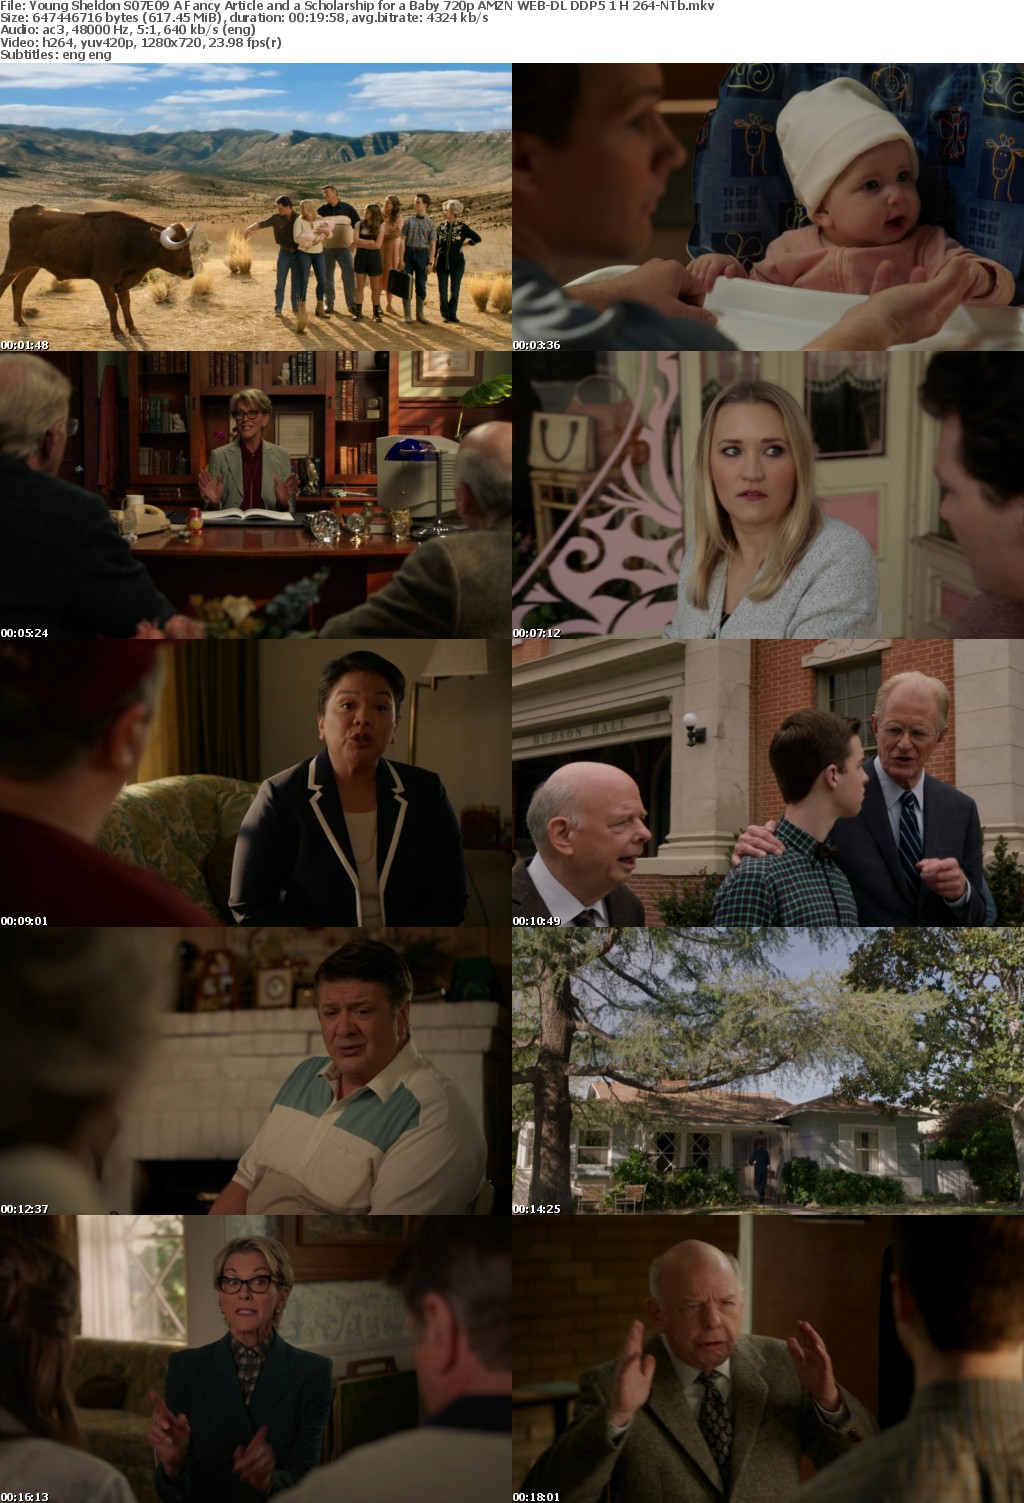 Young Sheldon S07E09 A Fancy Article and a Scholarship for a Baby 720p AMZN WEB-DL DDP5 1 H 264-NTb